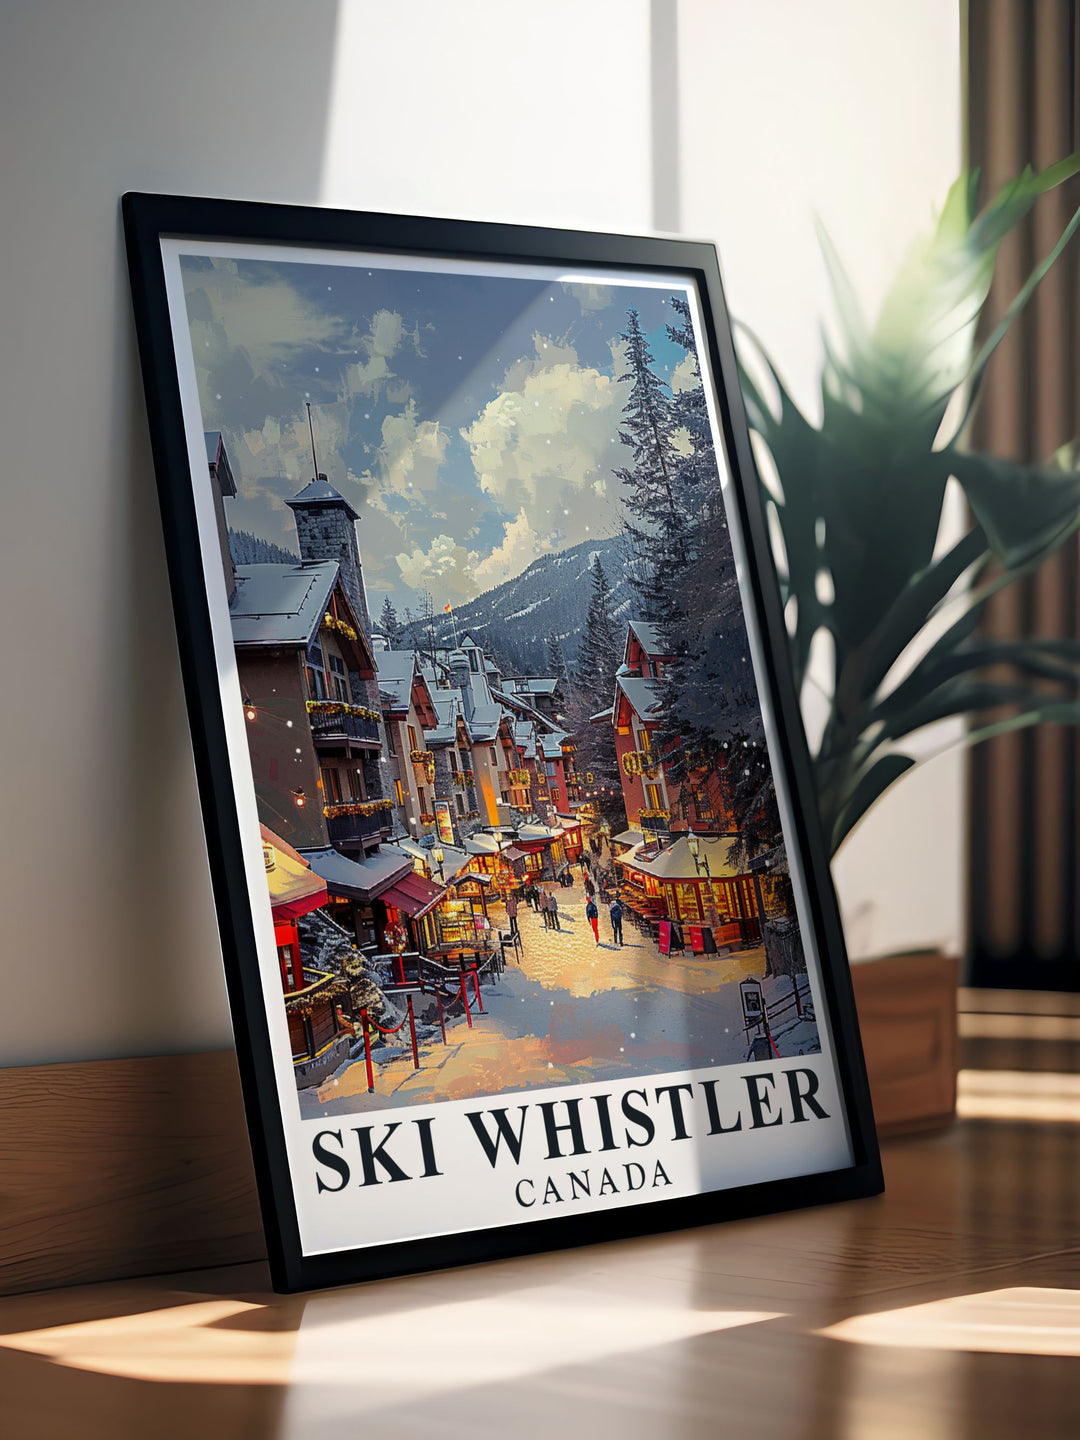 Featuring the stunning views of Whistler Ski Resort and the charm of Whistler Village, this travel poster is perfect for those who love exploring alpine destinations and experiencing the thrill of winter sports.